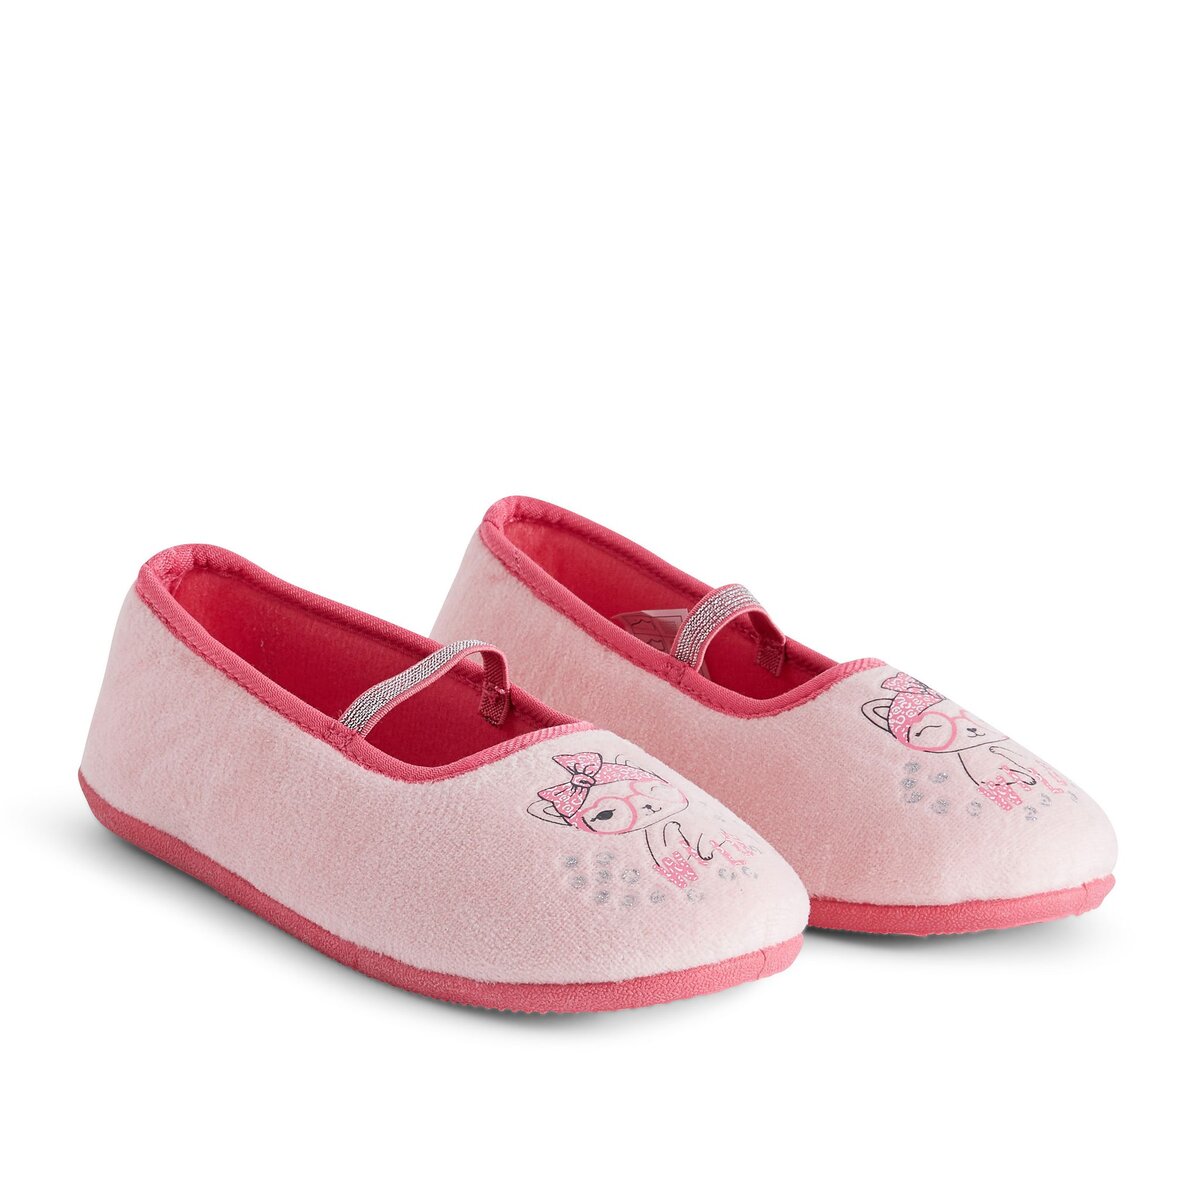 INEXTENSO Chausson ballerine rose fille 